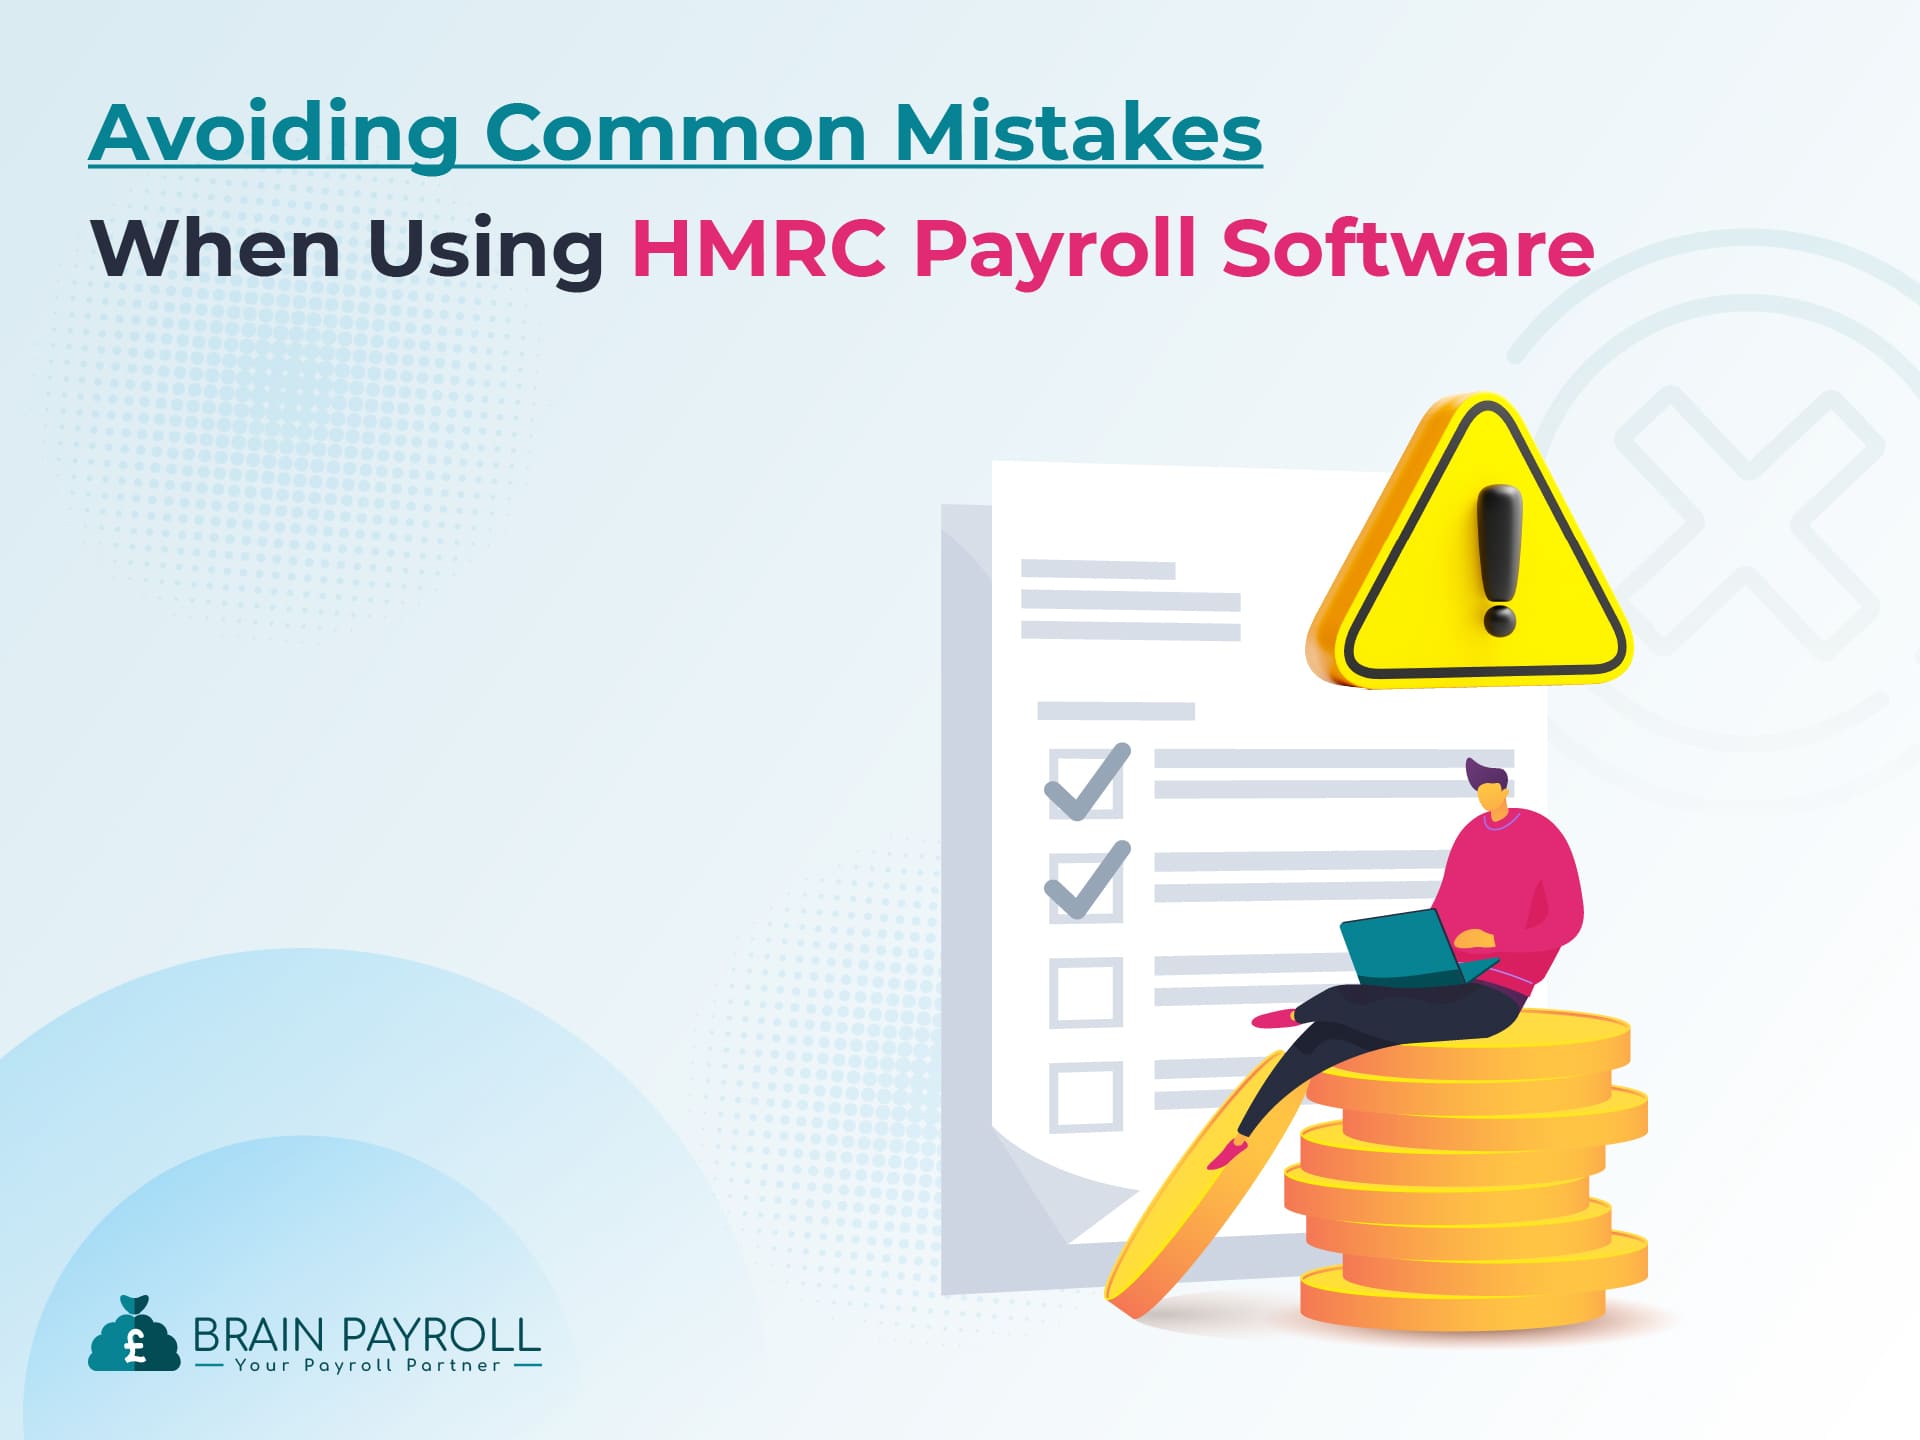 Avoiding Common Mistakes When Using HMRC Payroll Software